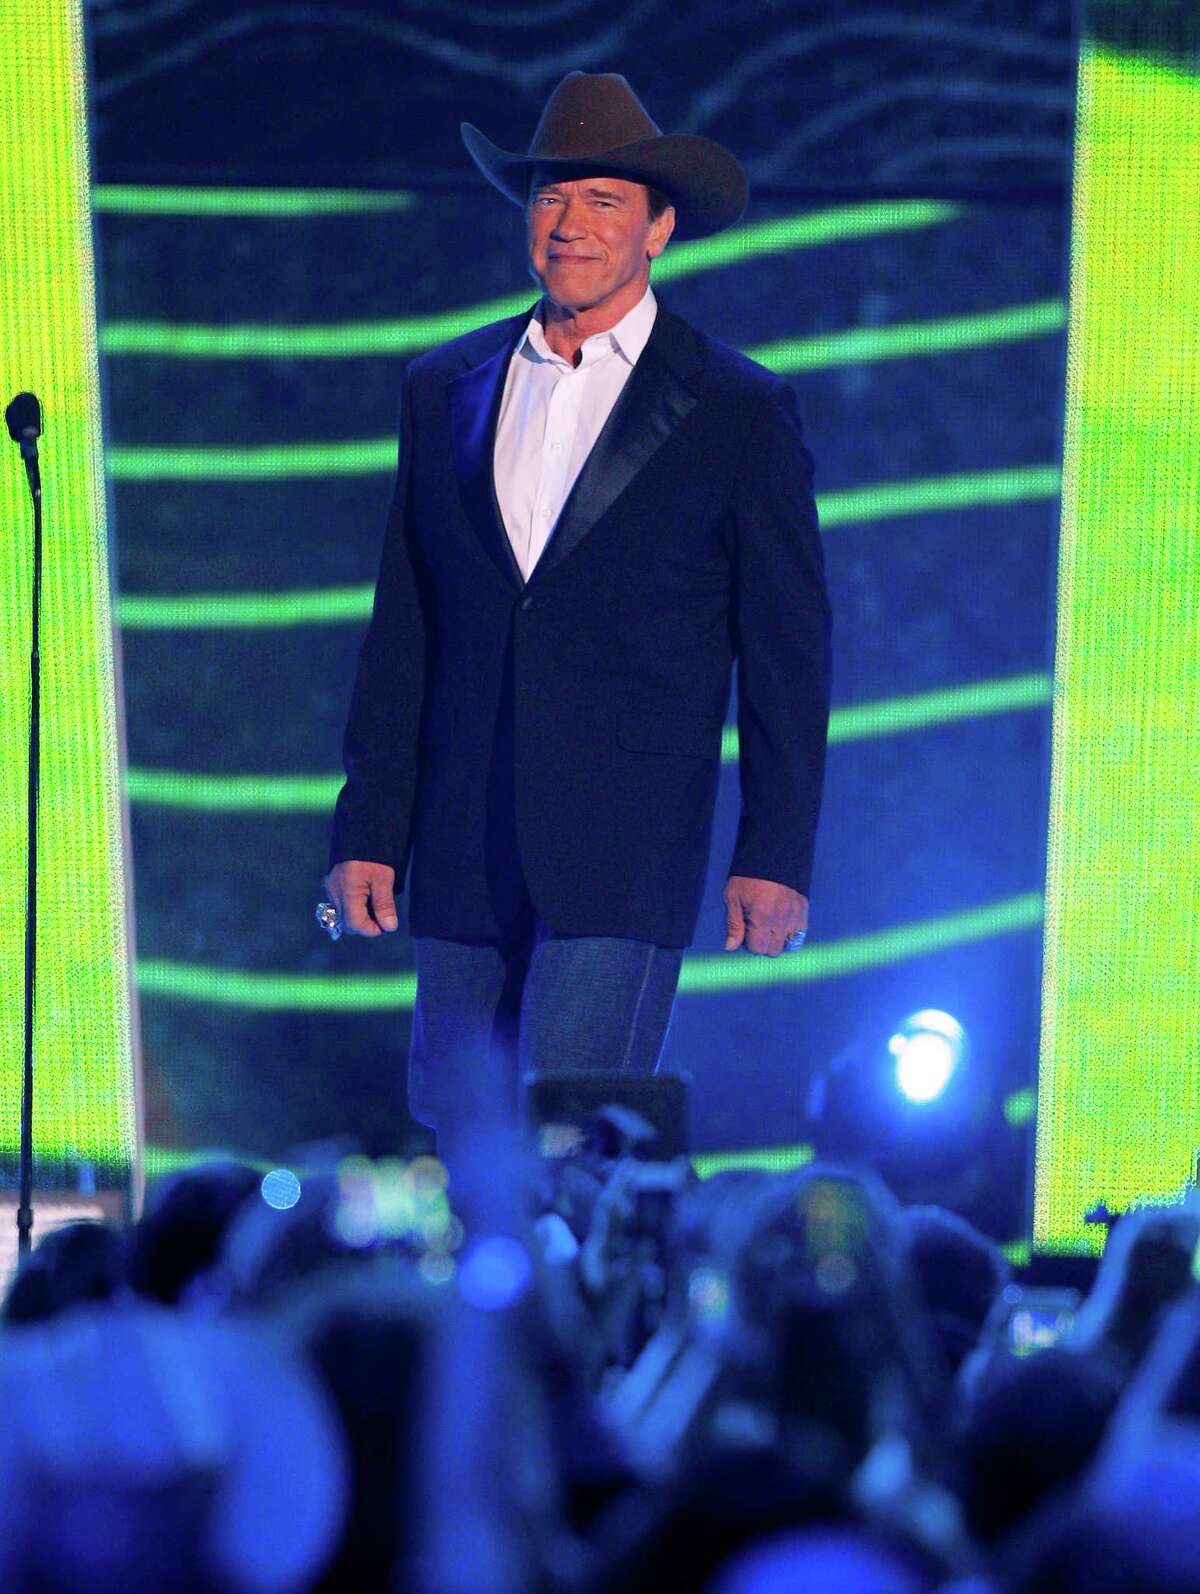 Arnold Schwarzenegger appears onstage at the CMT Music Awards at Bridgestone Arena on Wednesday, June 10, 2015, in Nashville, Tenn. (Photo by Wade Payne/Invision/AP) ORG XMIT: TNDC192